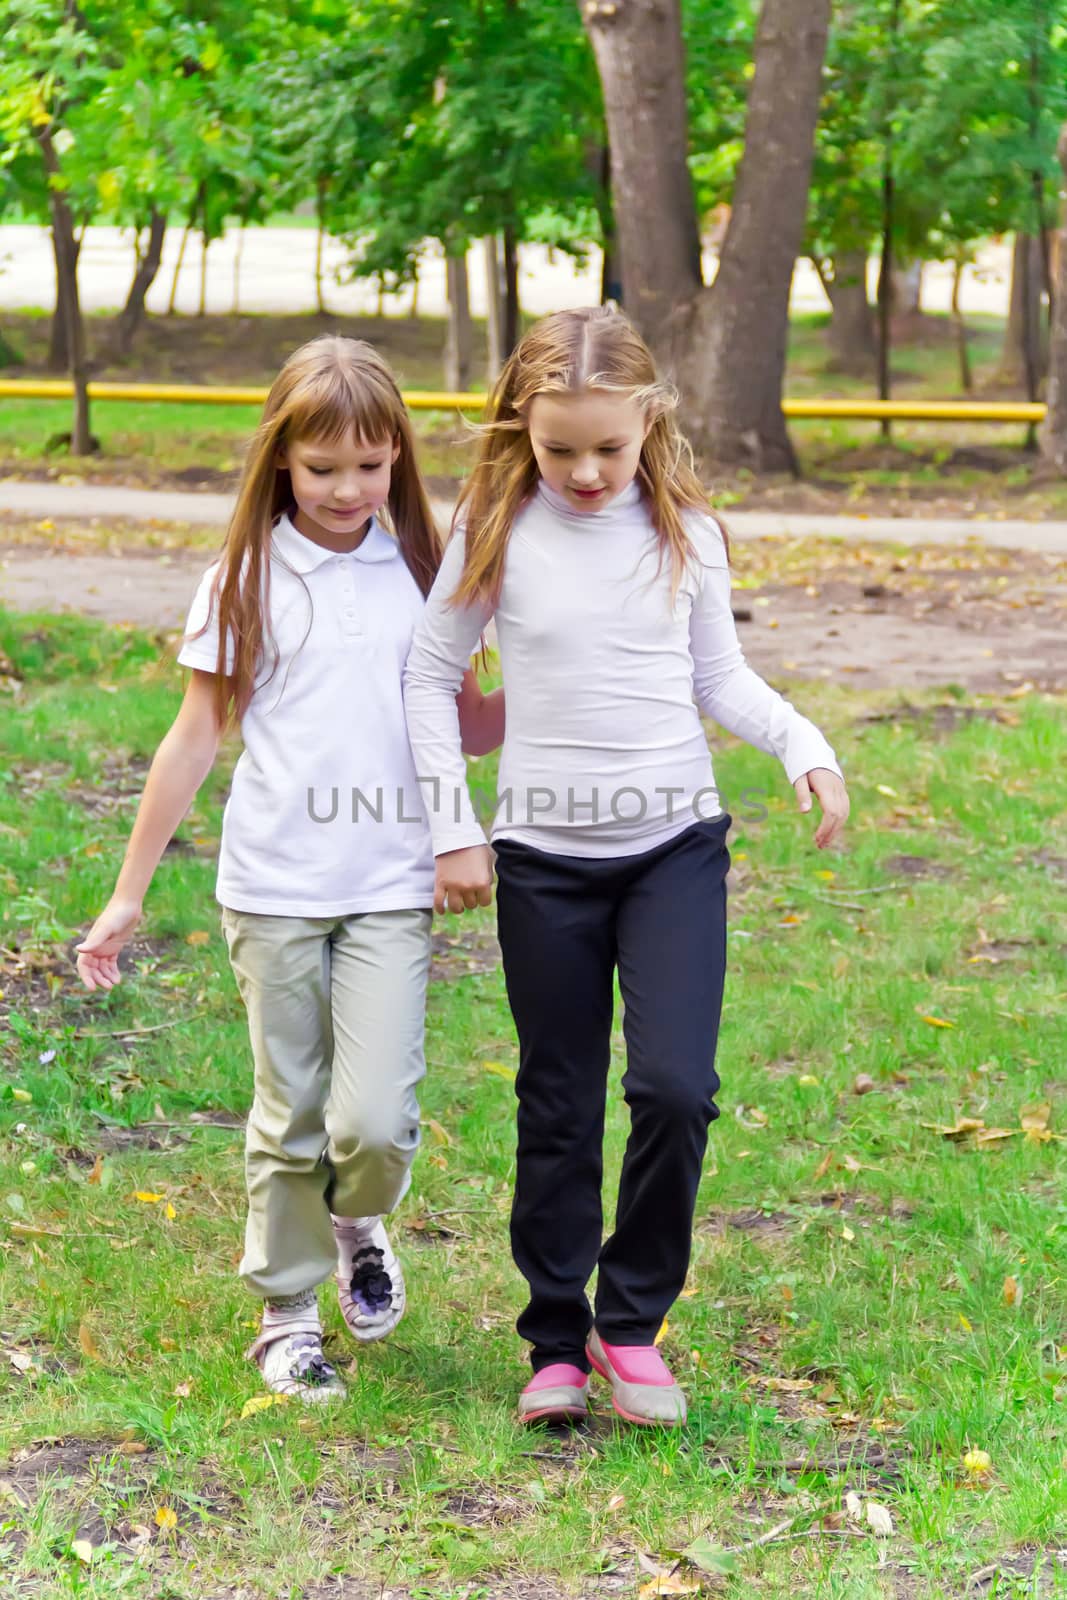 Photo of two walking girls in summer